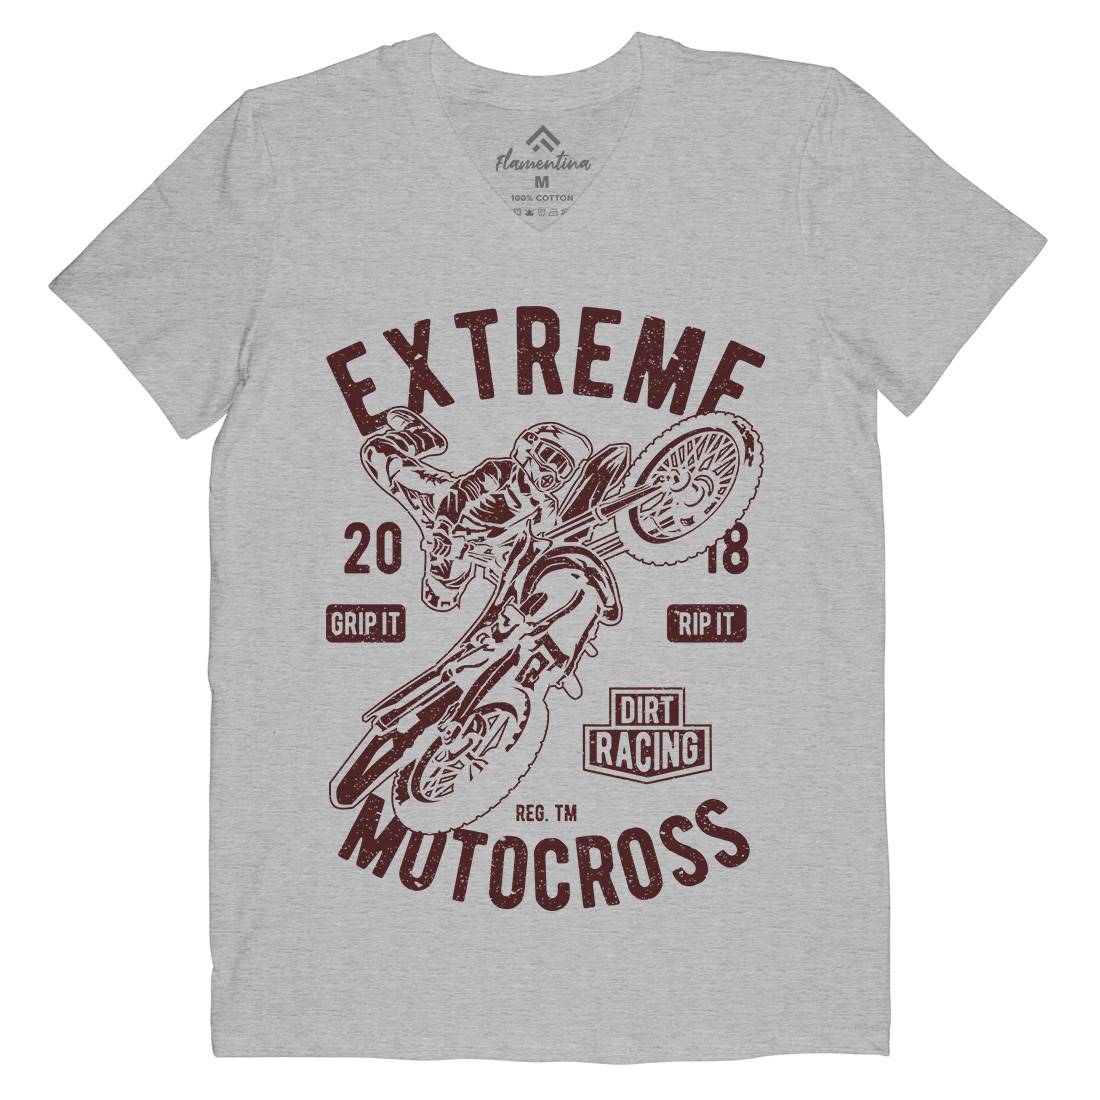 Extreme Motocross Mens V-Neck T-Shirt Motorcycles A651